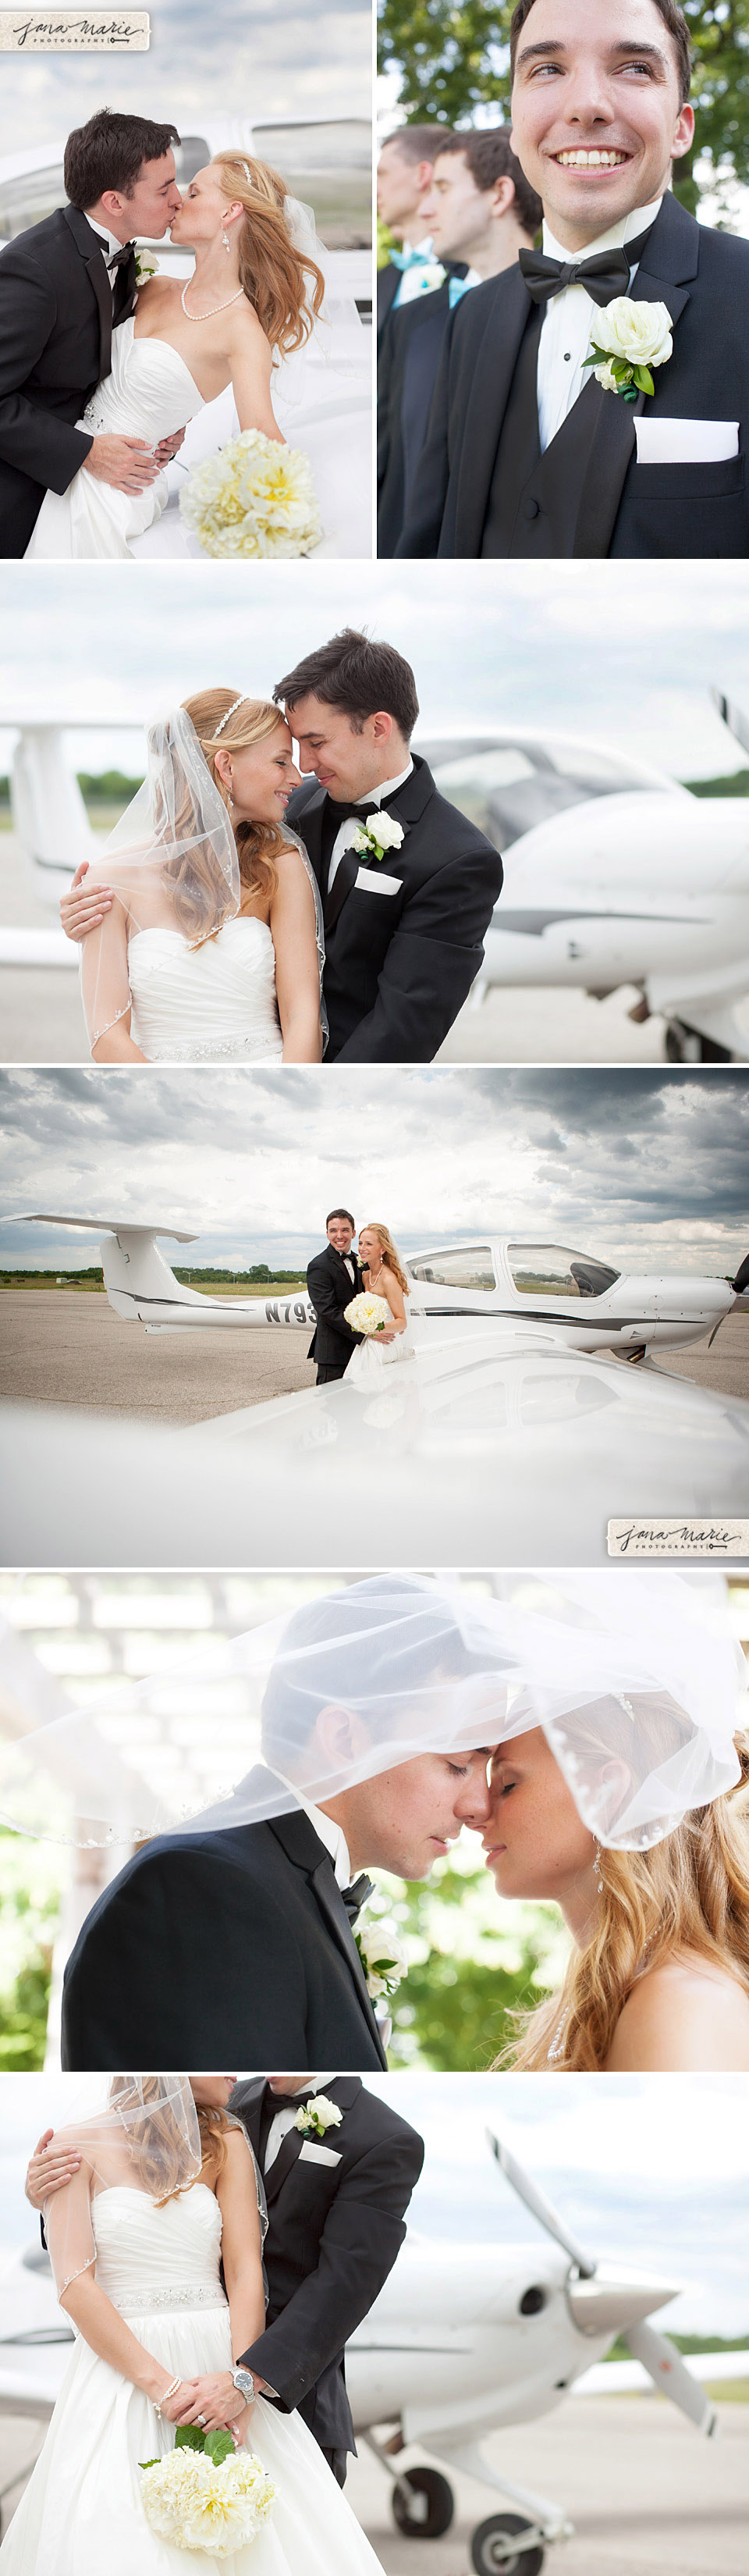 Intense clouds, Airports, Planes, Bride & groom, Wedding day photos, Jana Marie